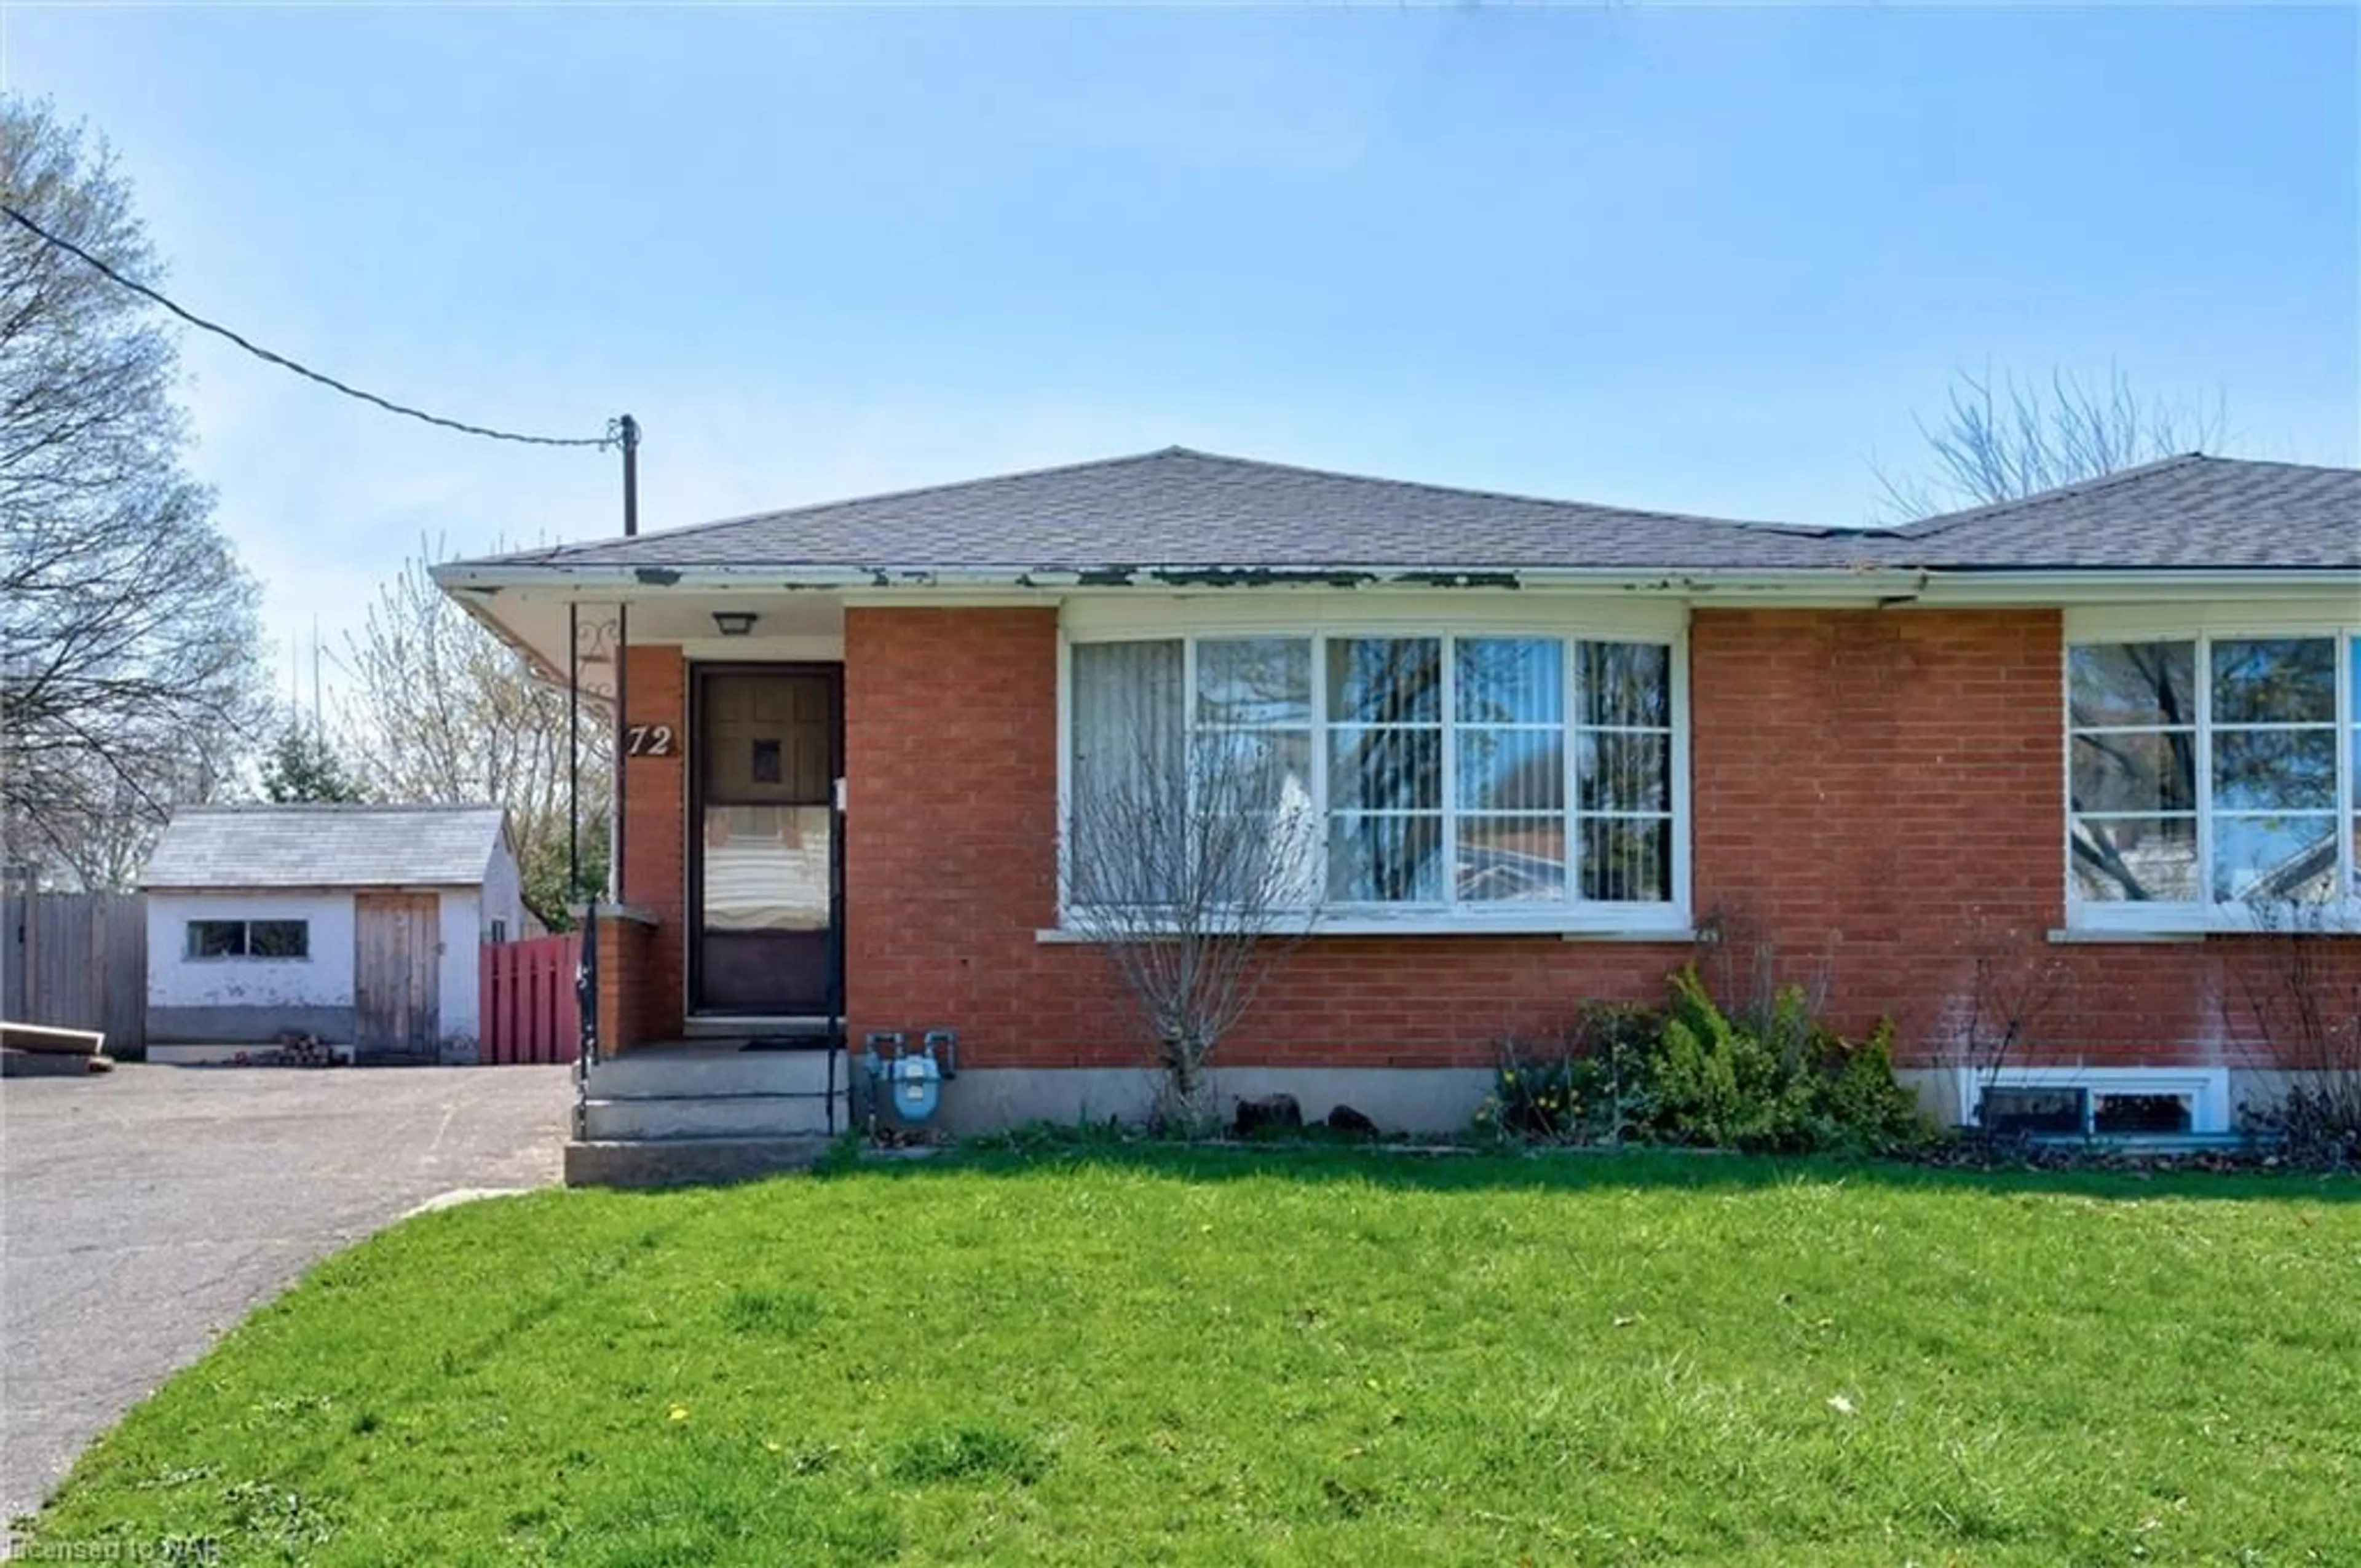 Home with brick exterior material for 72 Ted St, St. Catharines Ontario L2N 1E5